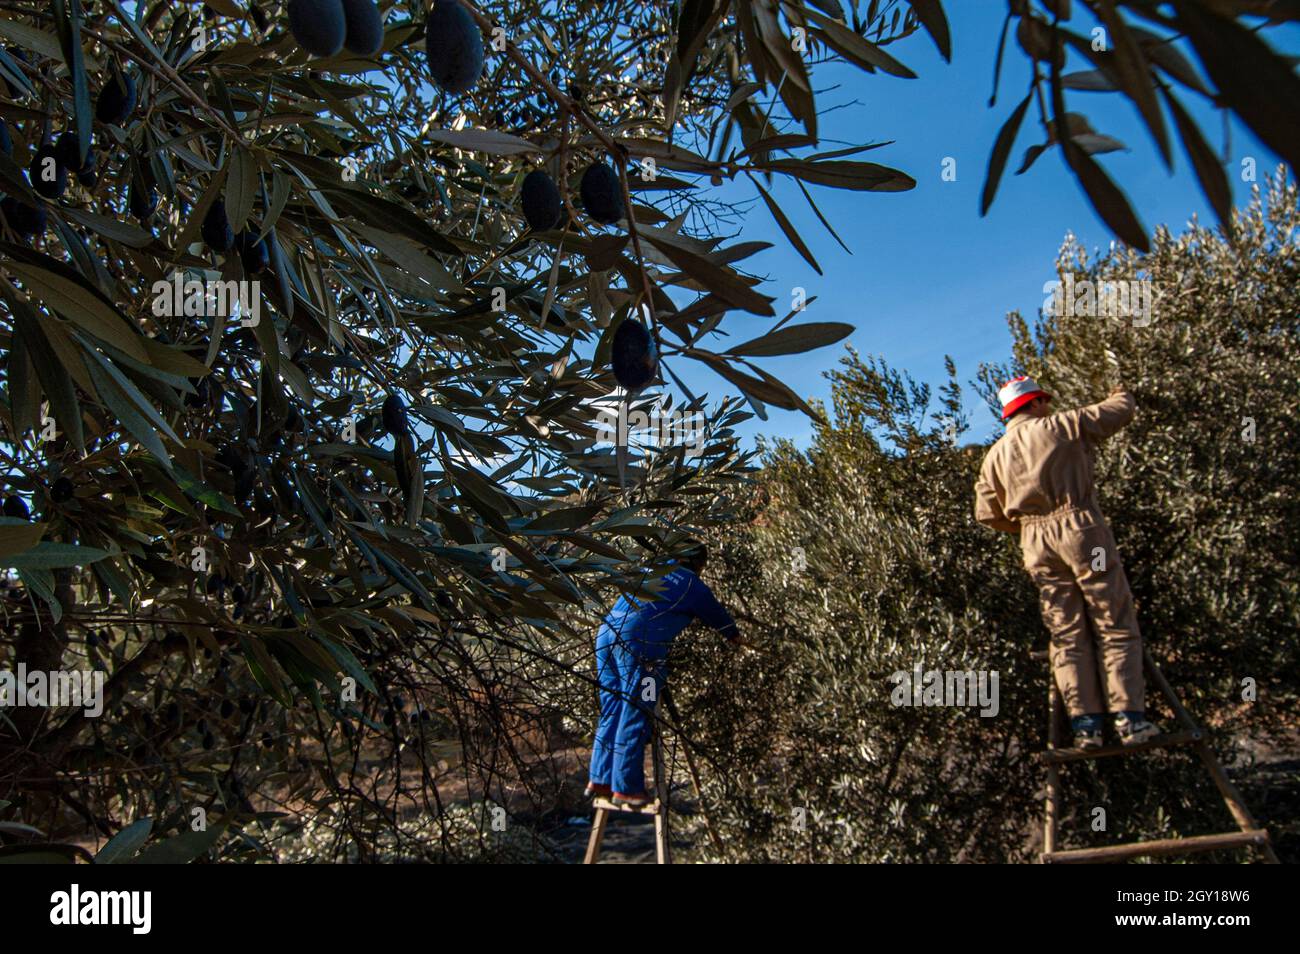 Harvesting olives for the manufacture of olive oil Stock Photo